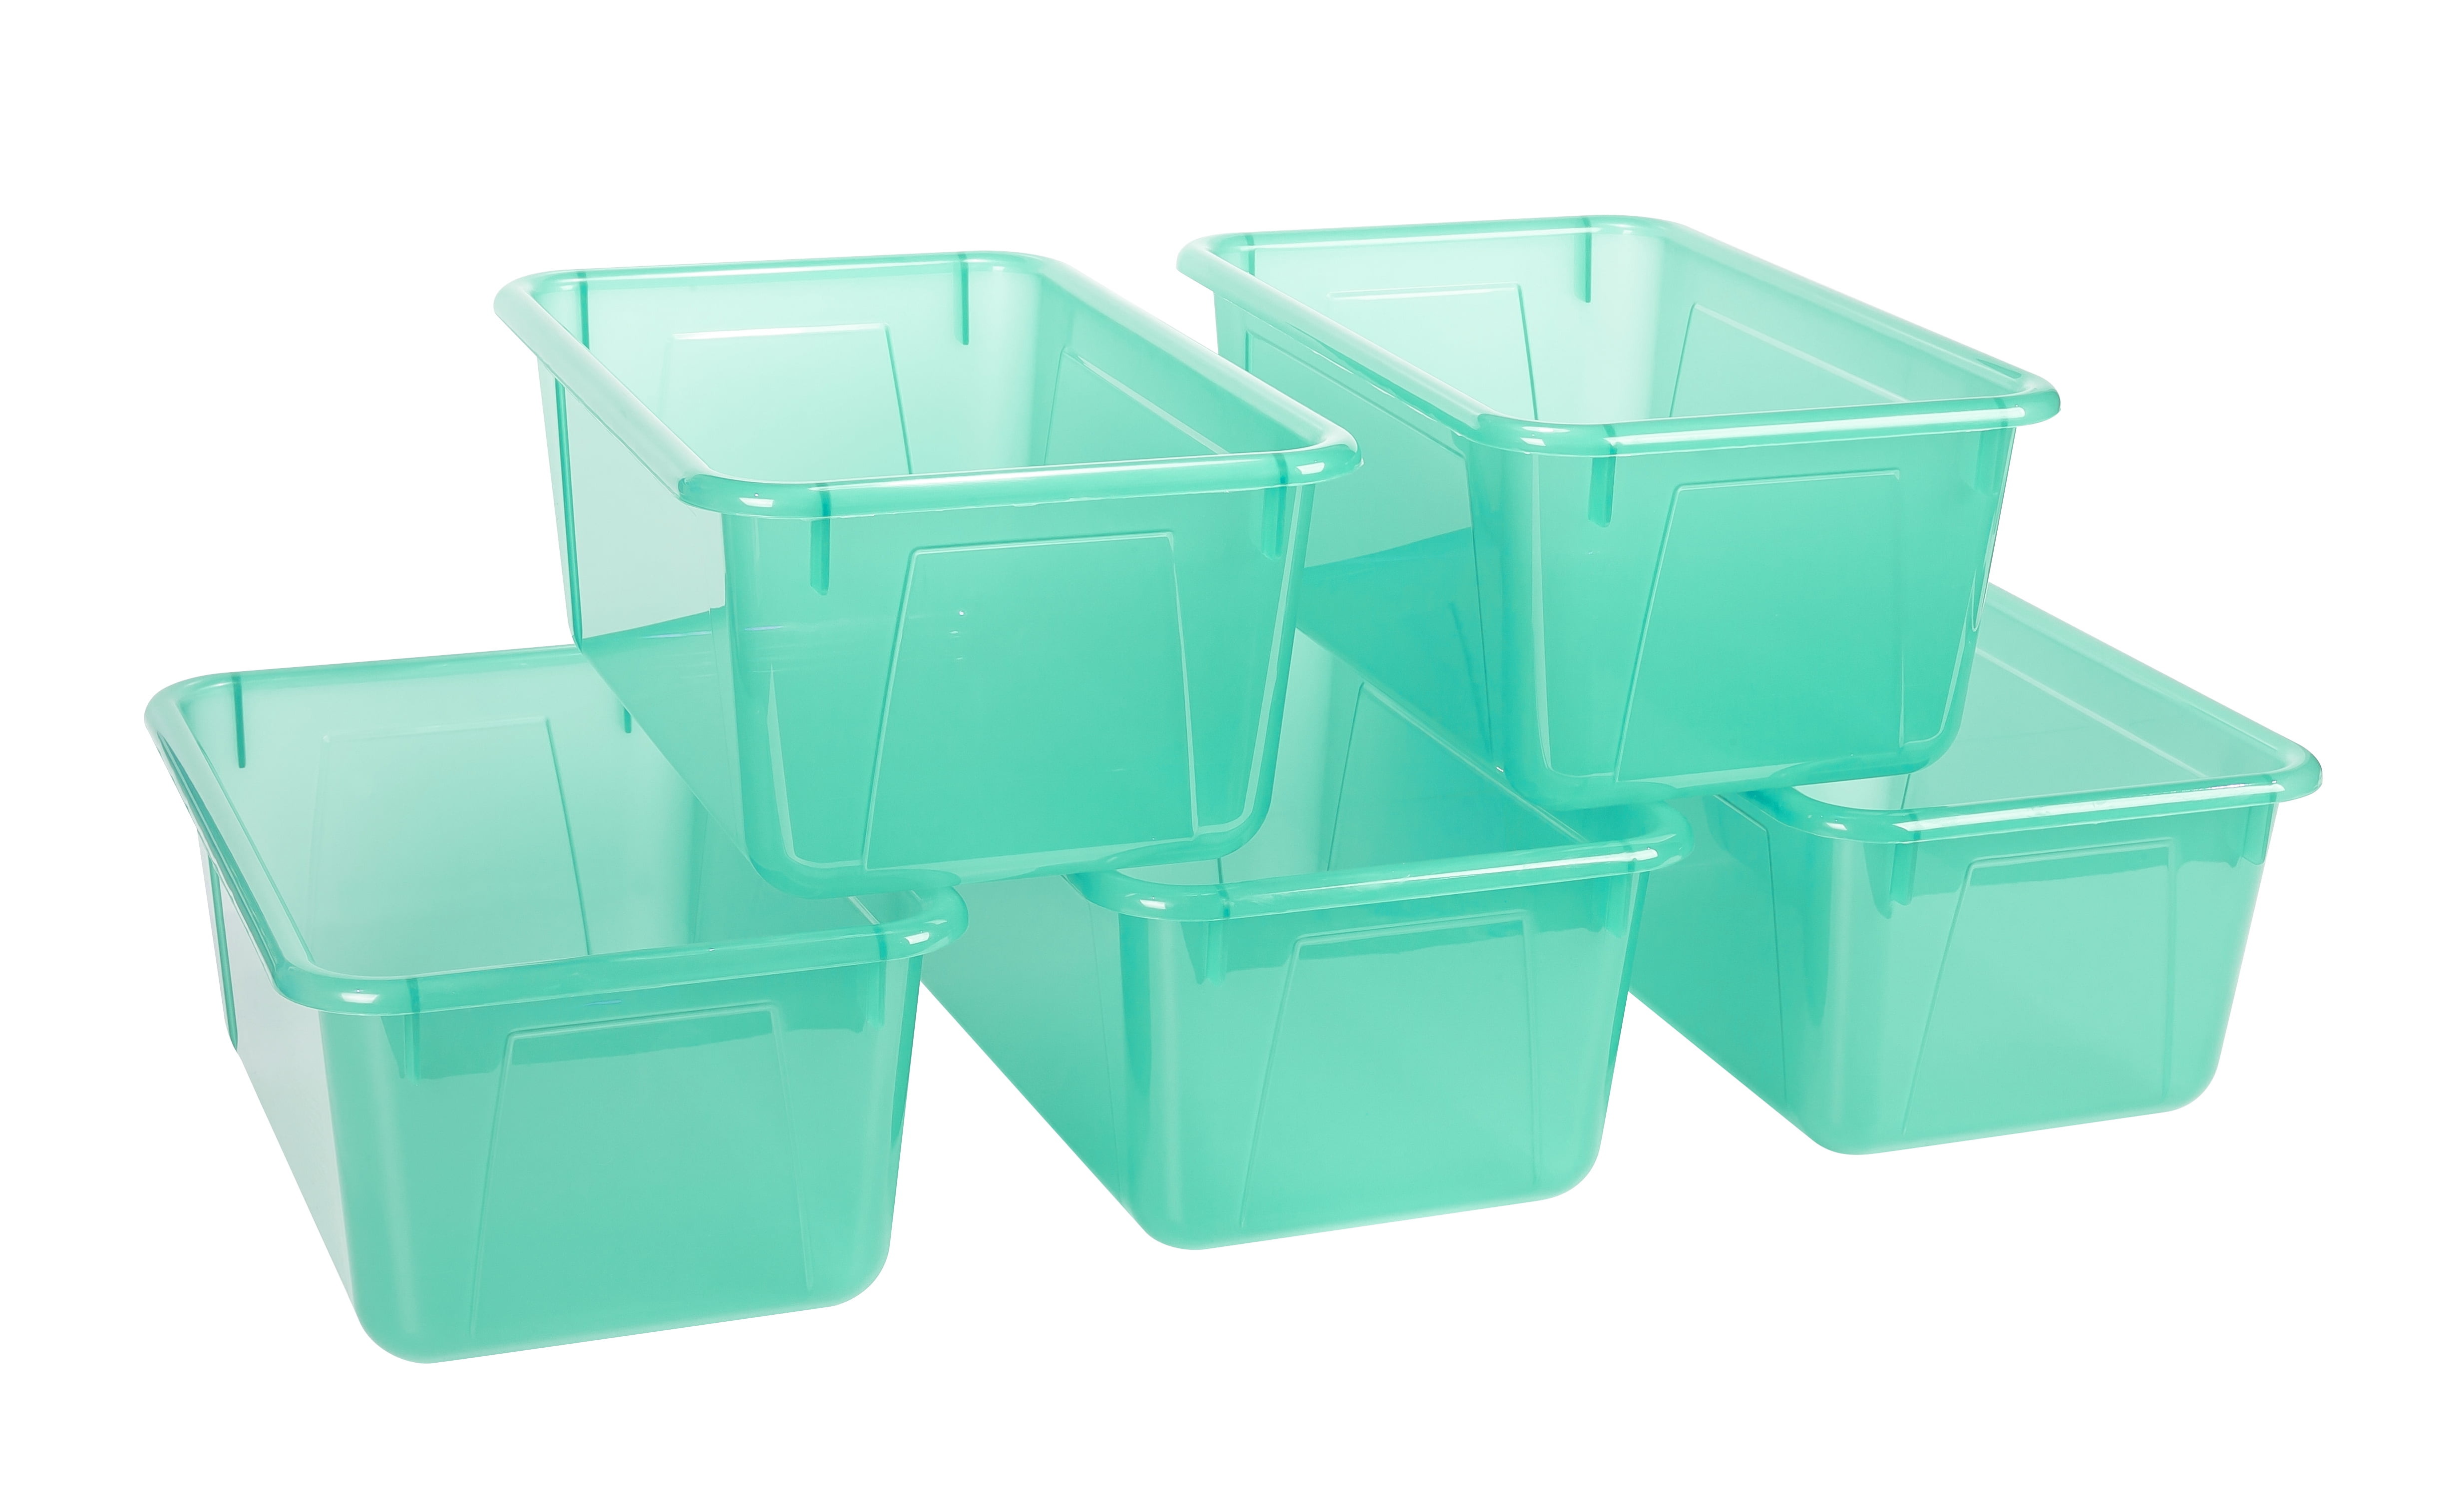 GAMENOTE Multicolor Storage Bins with Lids - 5 Qt 6 Pack Small Cubby Bins  Stackable Plastic Containers for Classroom Book Bin Toy Organizers (12× 7.2